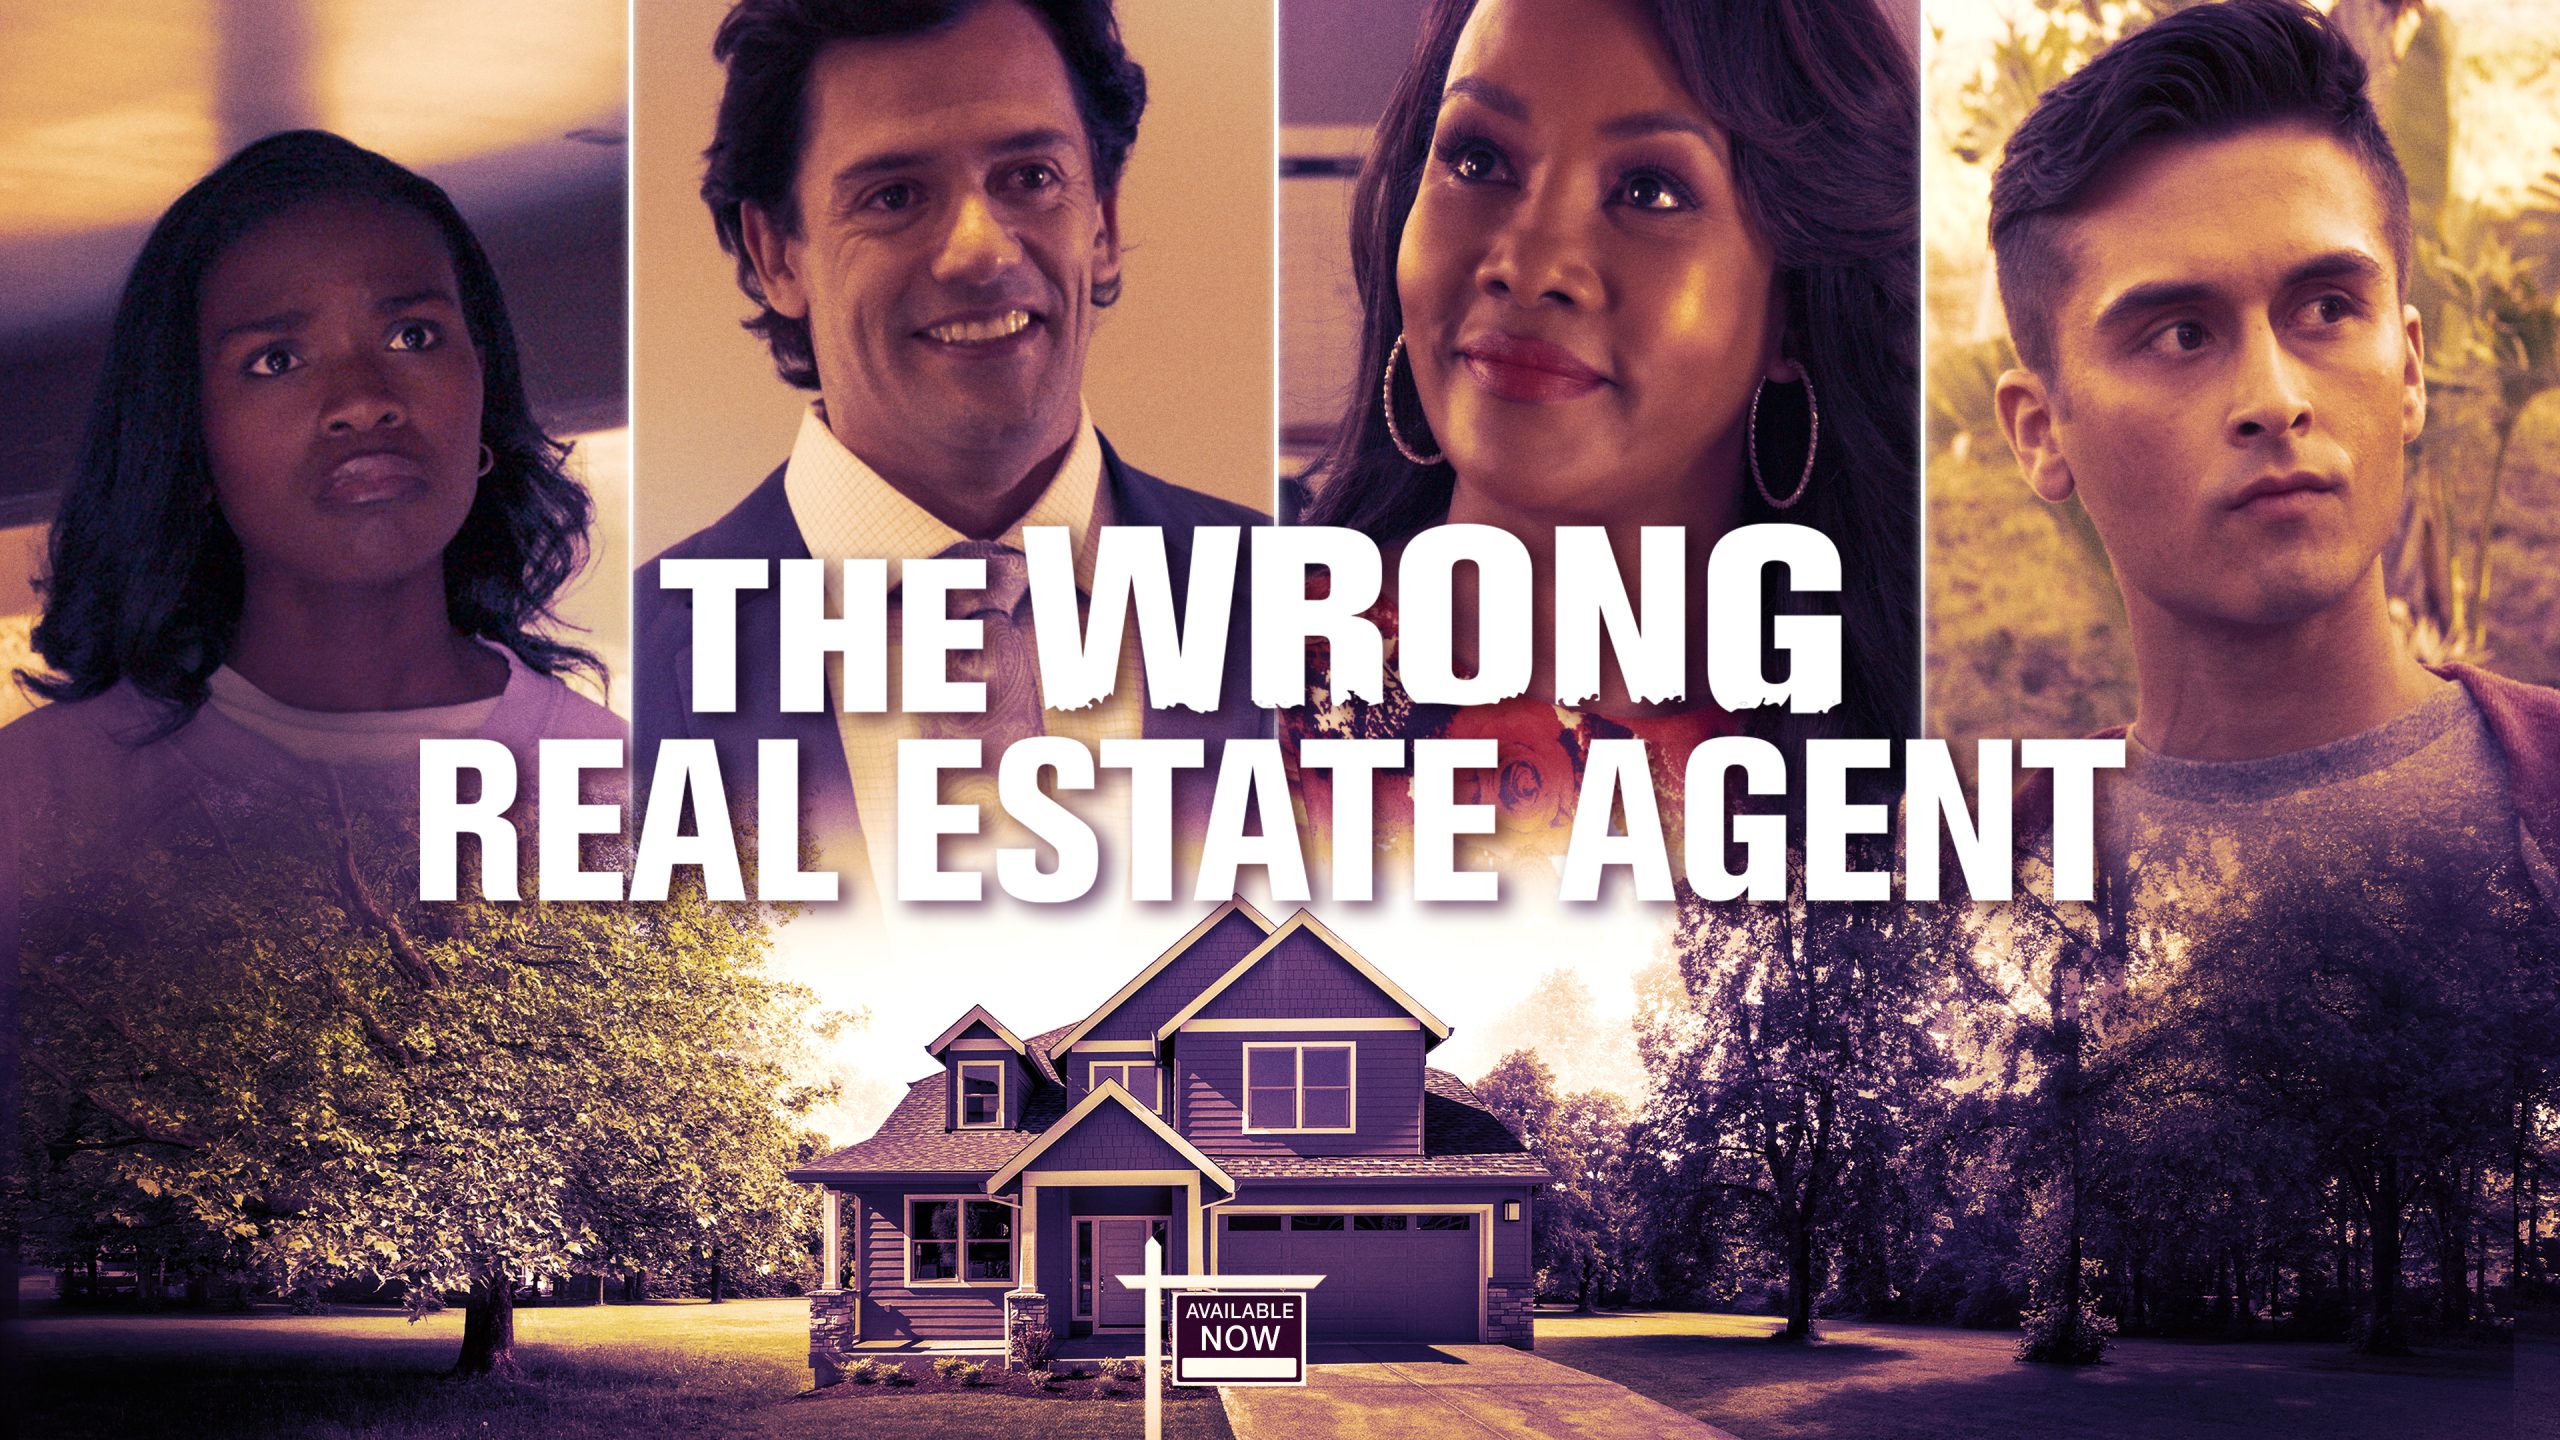 The Wrong Real Estate Agent